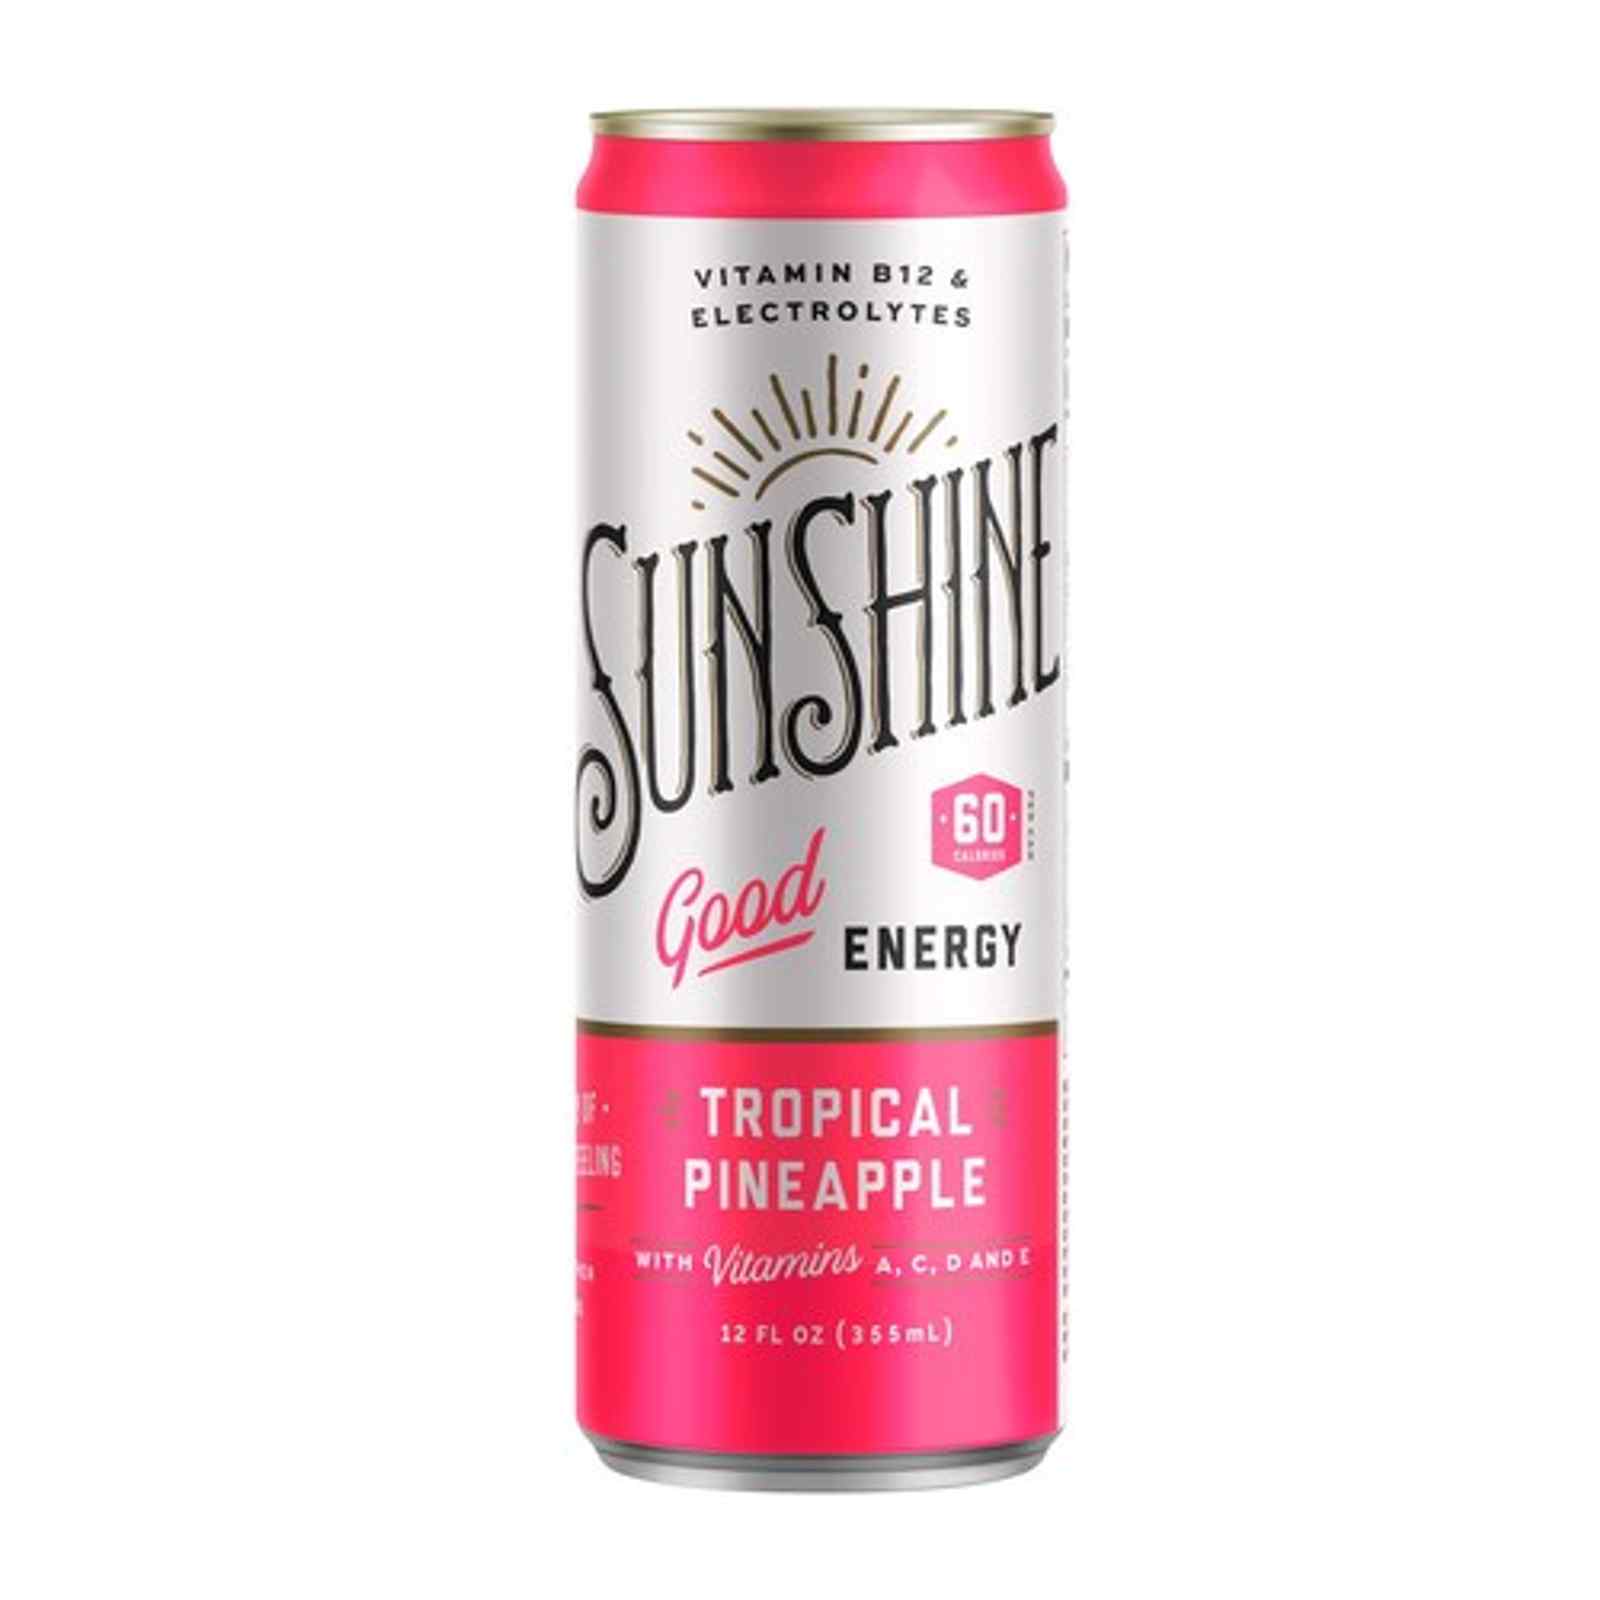 Sunshine Beverages Launches New Tropical Pineapple Sparkling Energy Drink; Expands Nationwide